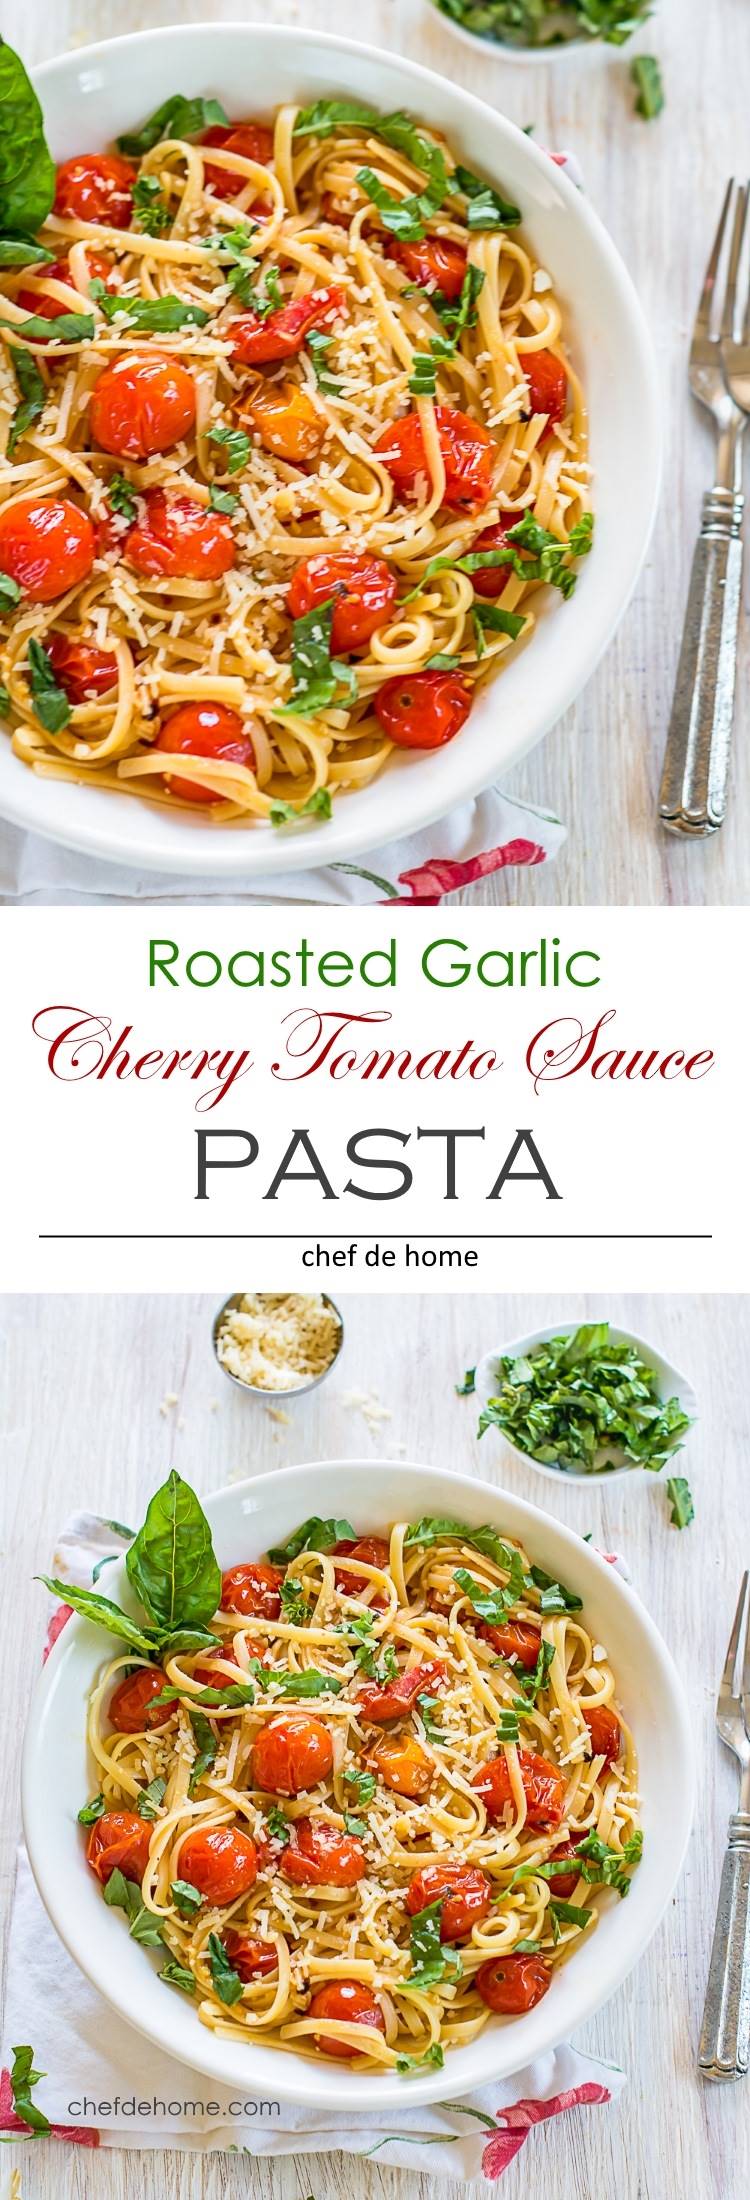 Pasta with Roasted Garlic and Burst Cherry Tomatoes Sauce for quick clean flavorful and easy weeknight pasta dinner | chefdehome.com